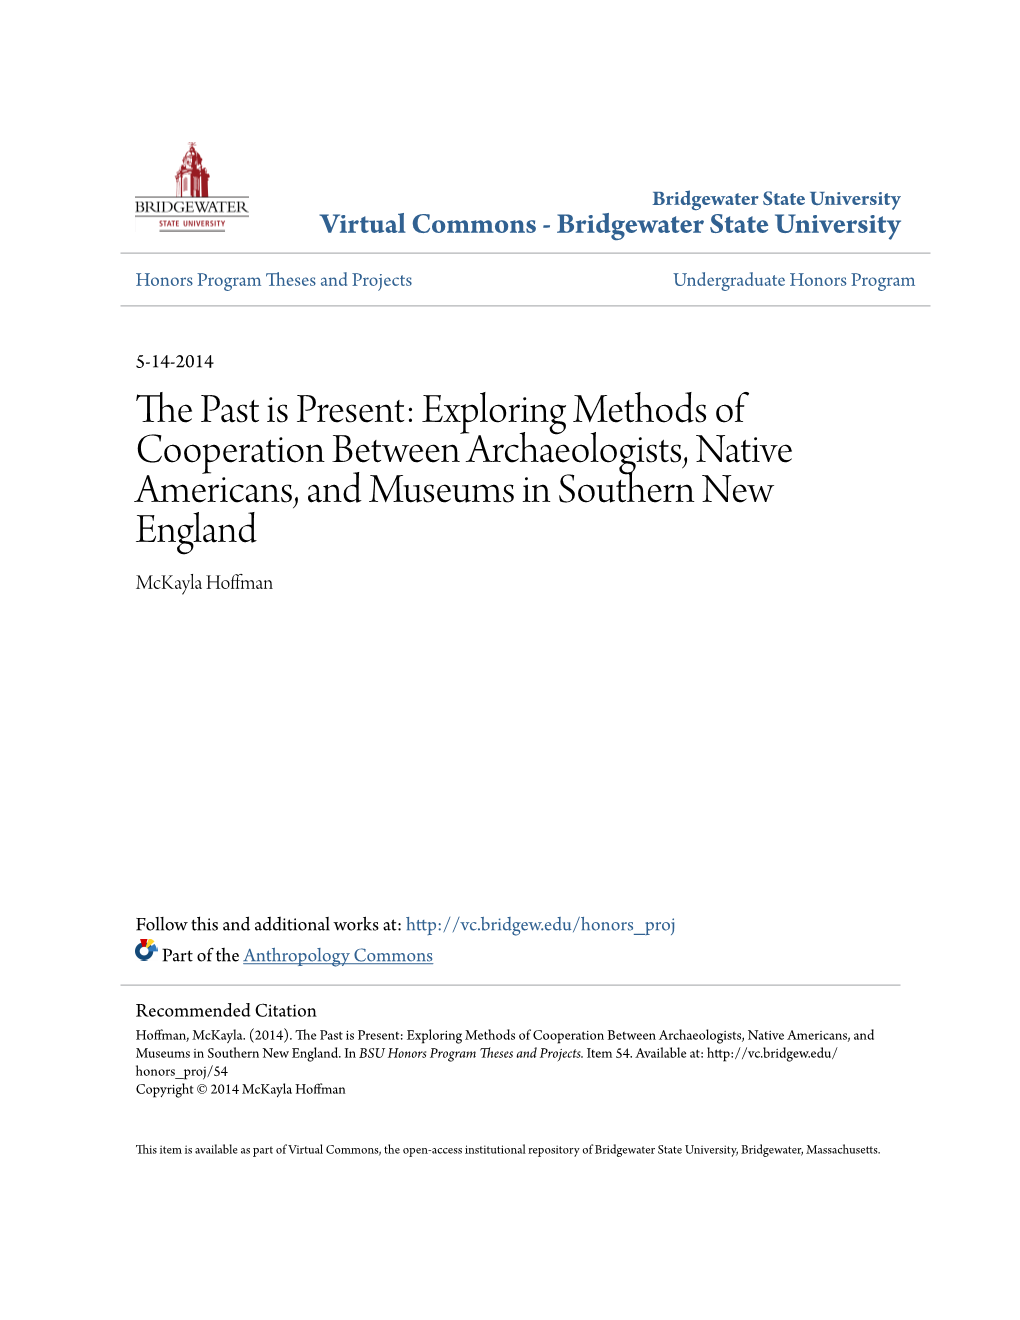 Exploring Methods of Cooperation Between Archaeologists, Native Americans, and Museums in Southern New England Mckayla Hoffman